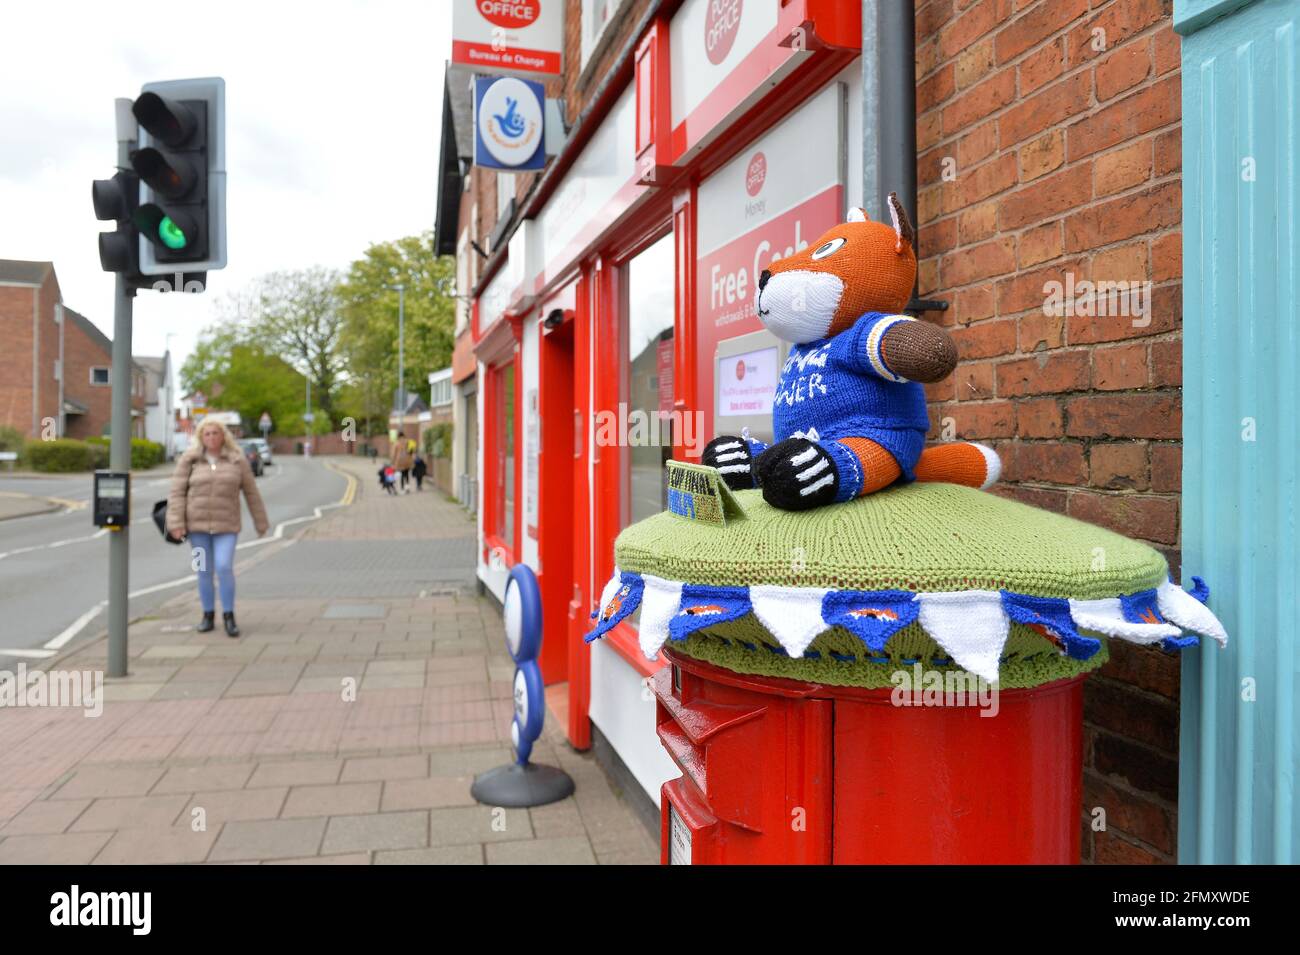 Leicester, Leicestershire, UK. 12th May, 2021. UK News. Another Leicester City Football Club themed yarn bomb has appeared on a post box in Syston ahead of the FA Cup Final between Leicester City and Chelsea at the weekend. Credit: Alex Hannam/Alamy Live News Stock Photo